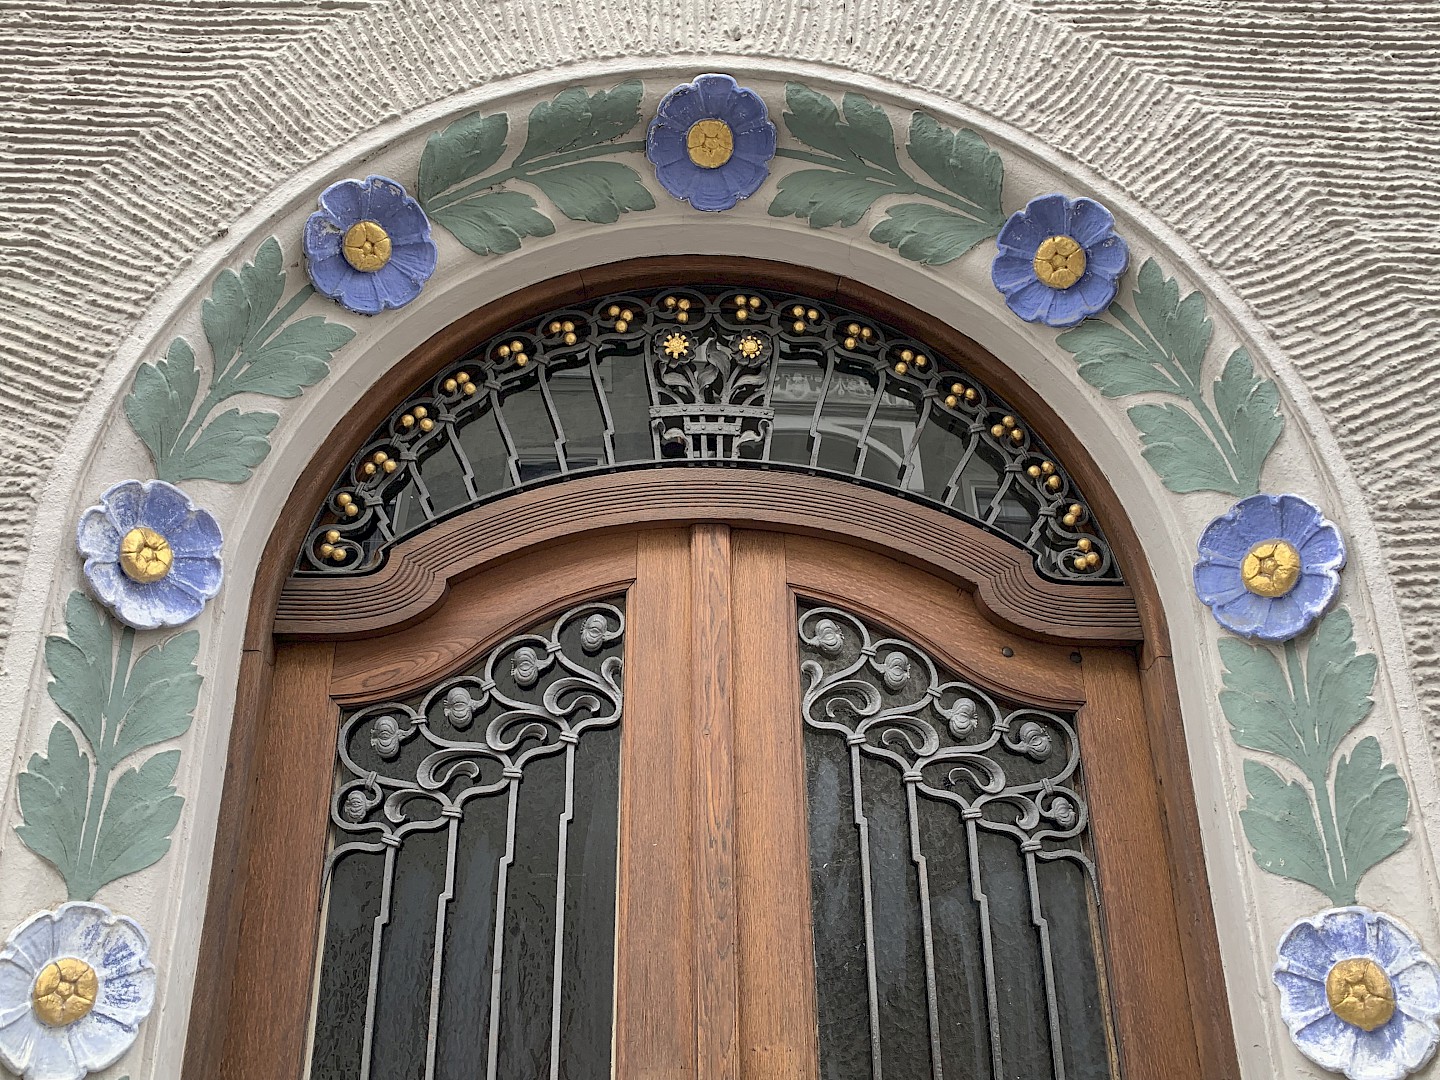 Typical floral decorative arch and ornate door in Schwabing